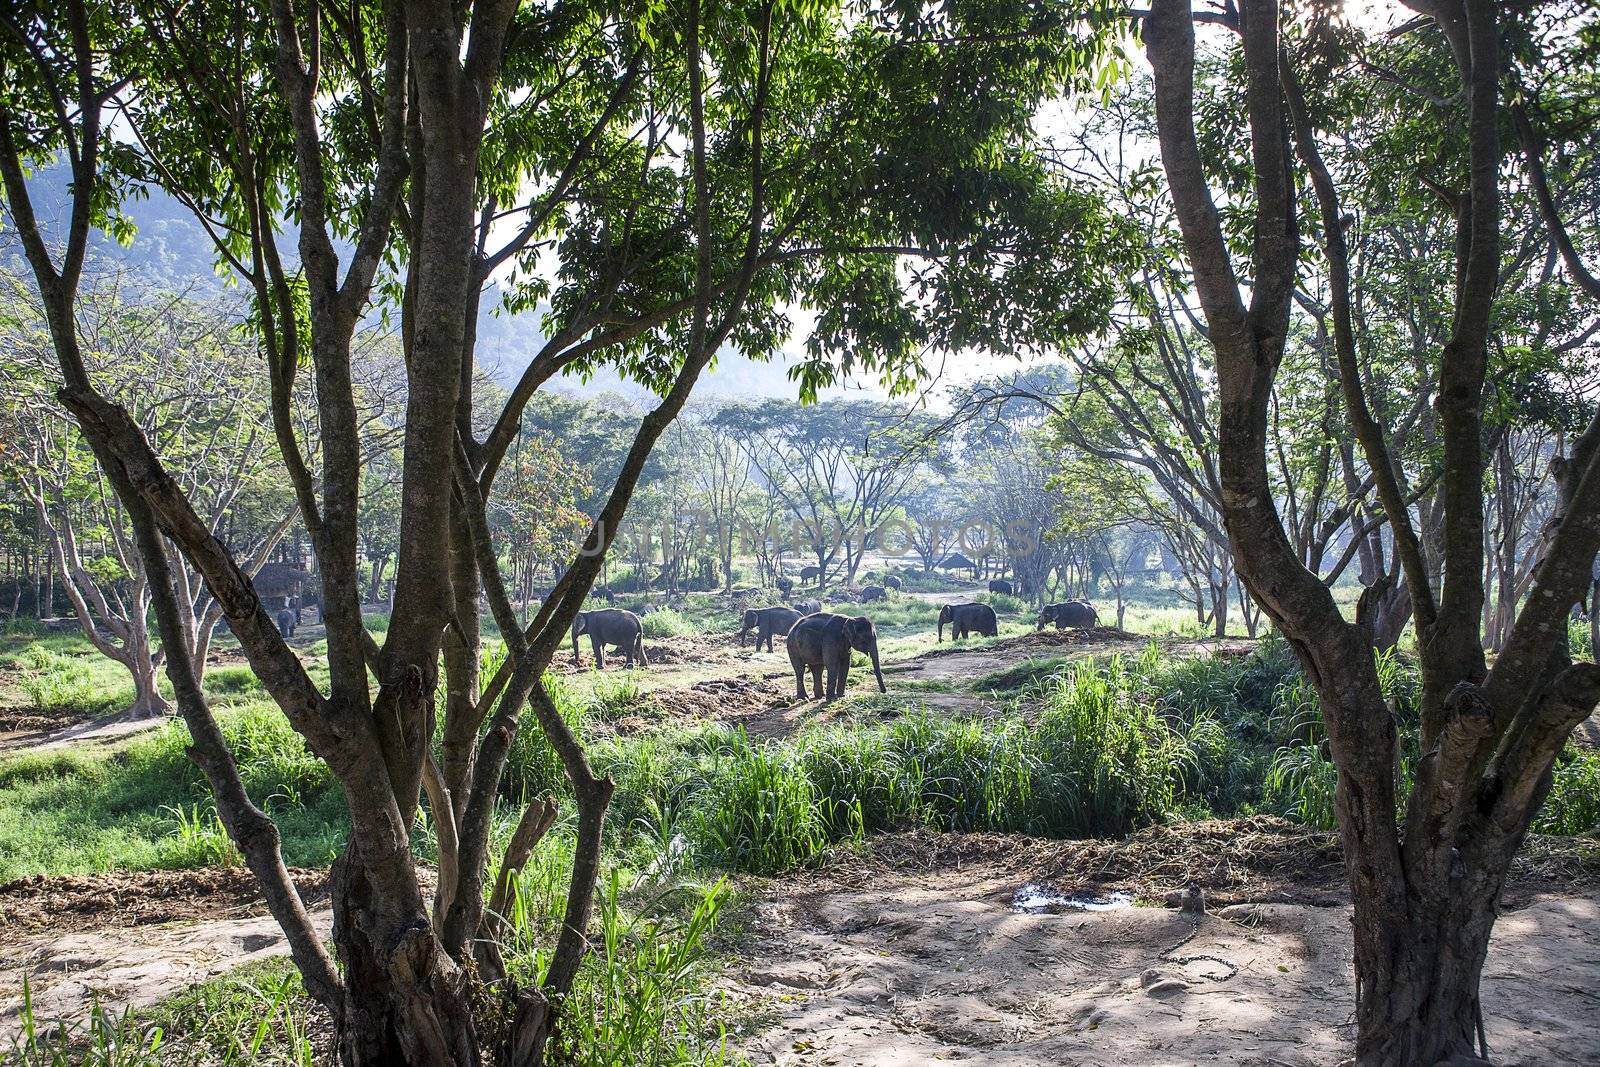 Asia elephant stand in the farm, Thailand